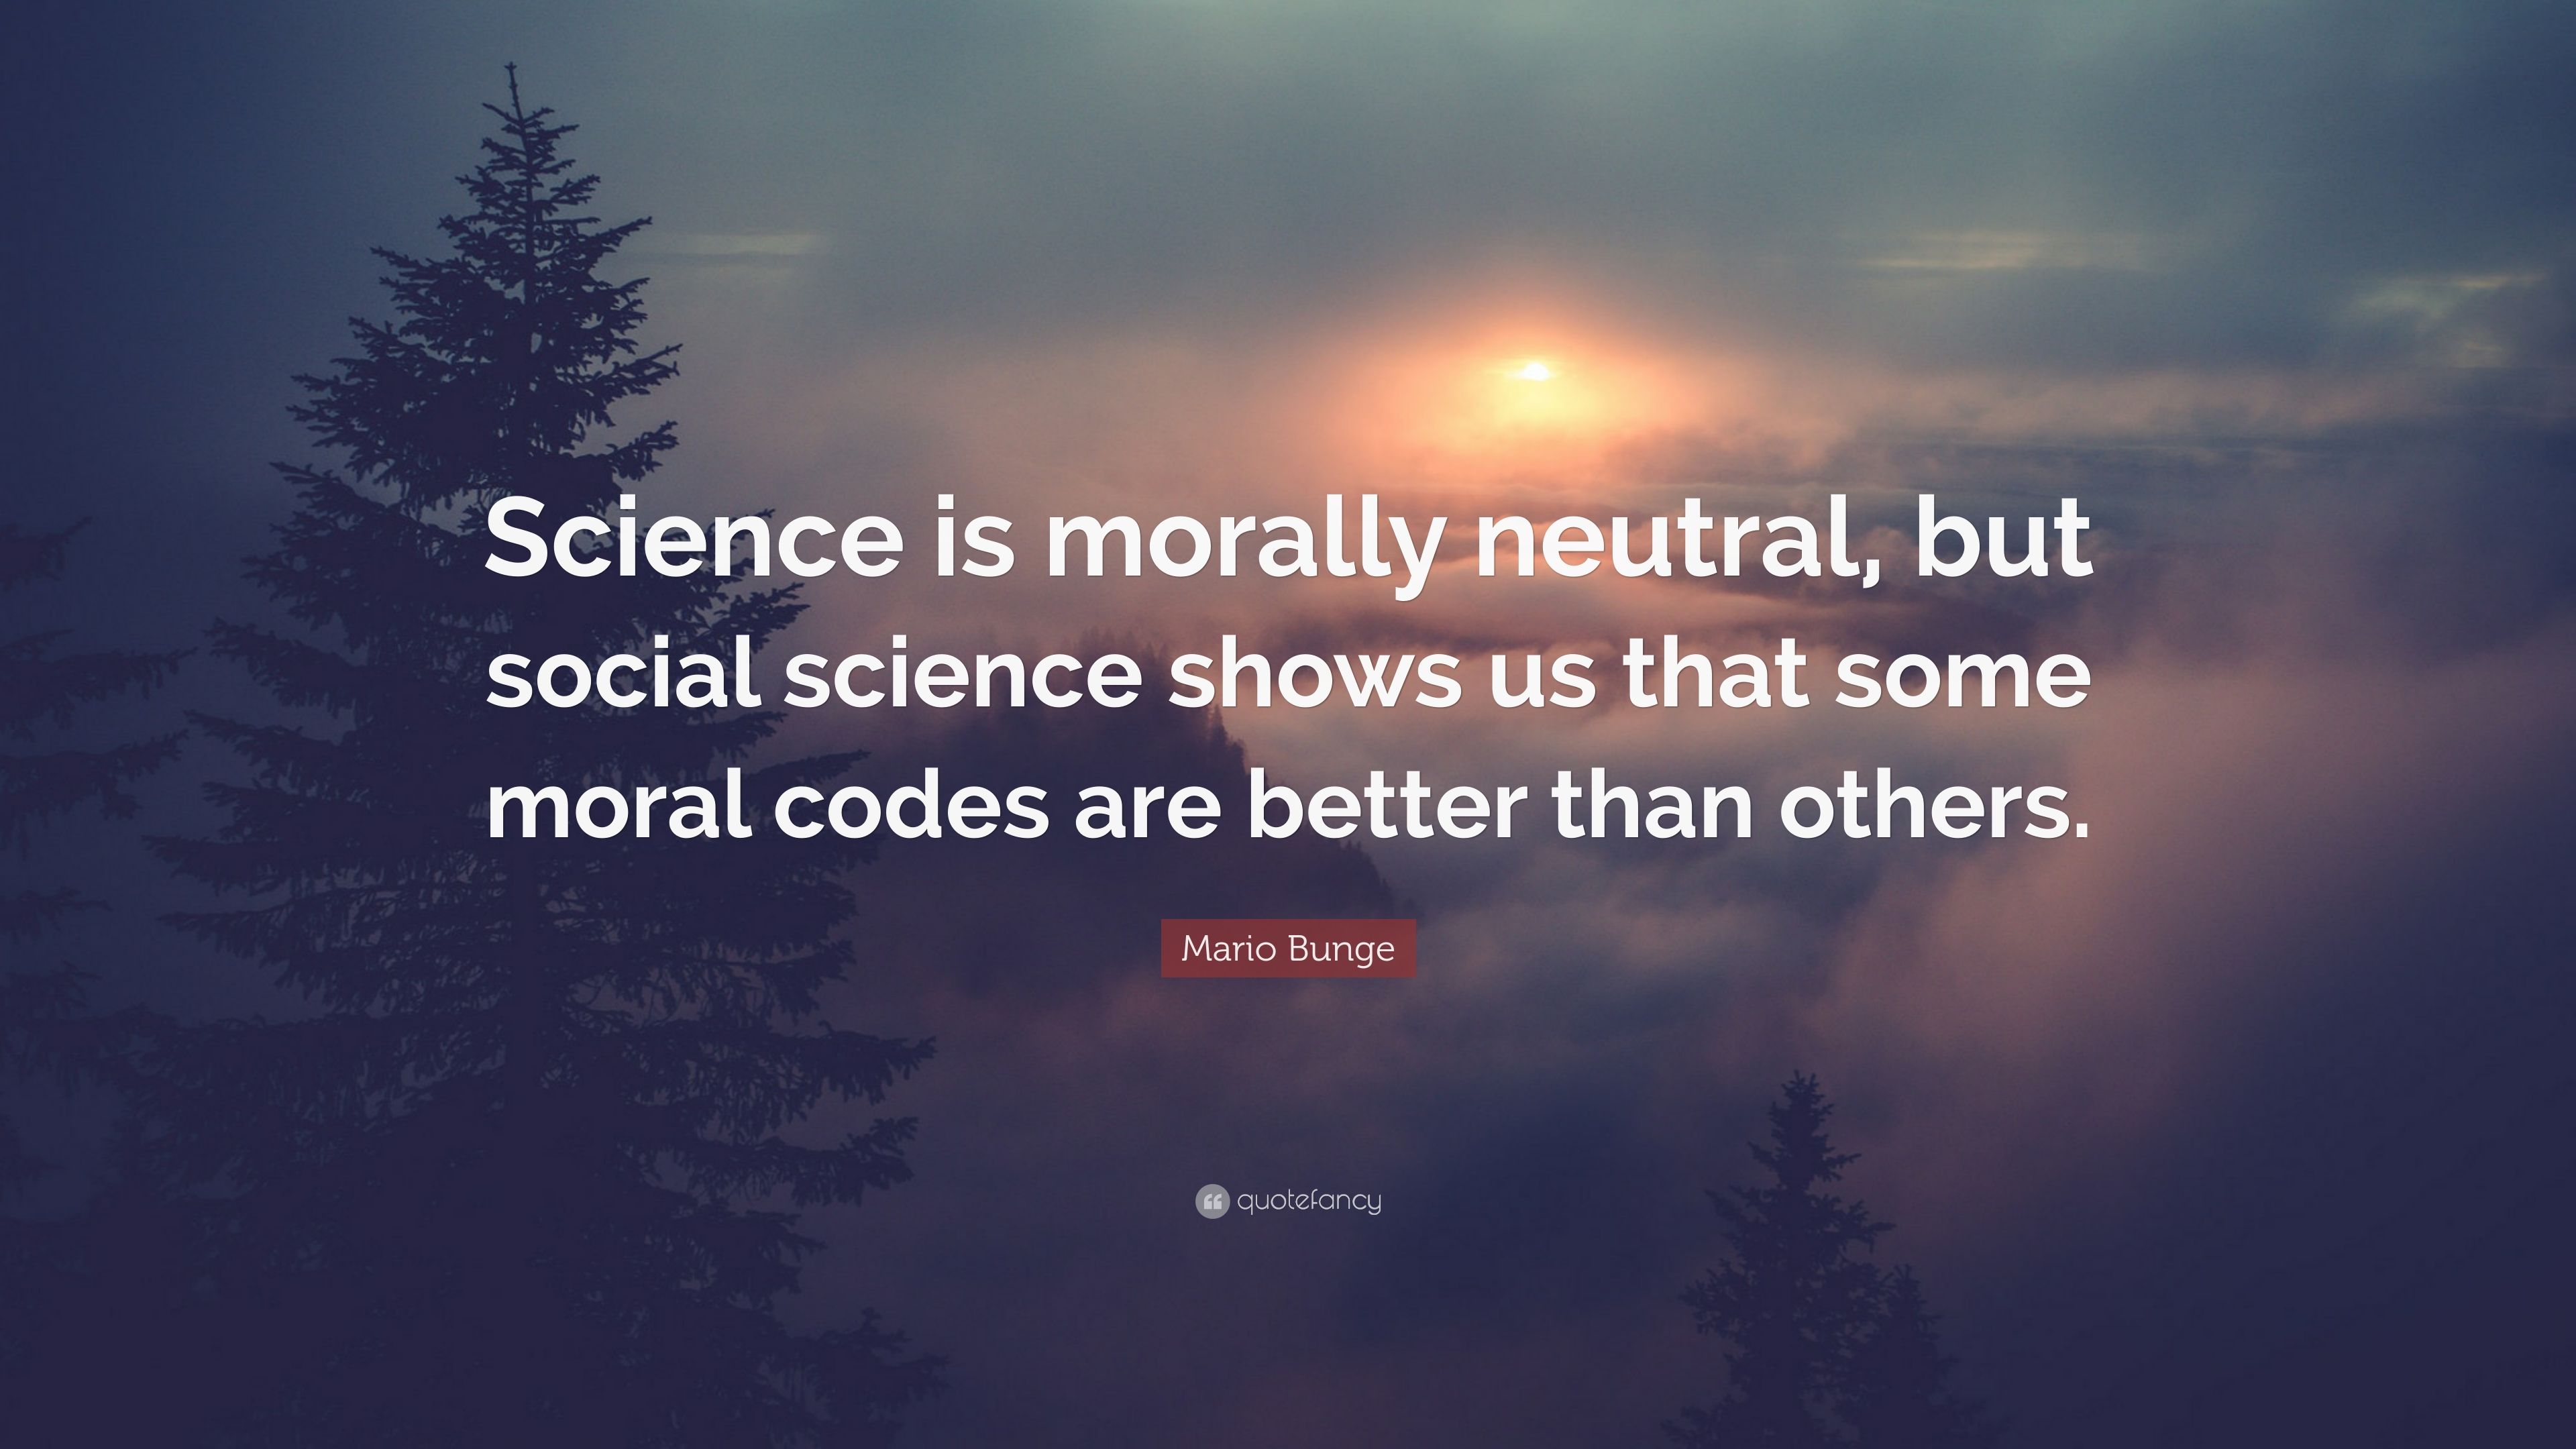 Mario Bunge Quote: “Science is morally .quotefancy.com